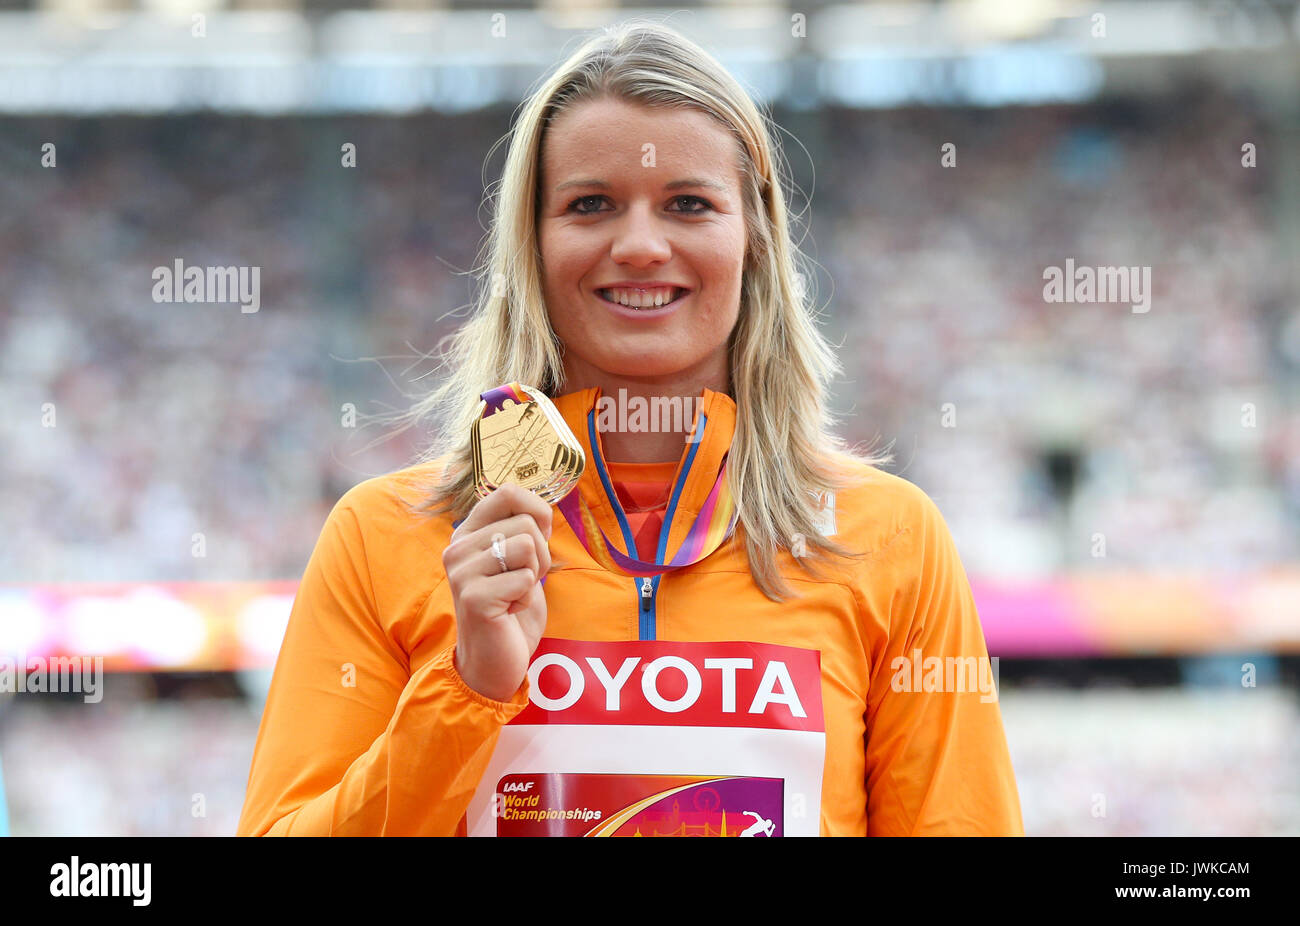 Netherland's Dafne Schippers celebrates with the gold medal on the podium for the Womens 200m Final during day nine of the 2017 IAAF World Championships at the London Stadium. PRESS ASSOCIATION Photo. Picture date: Saturday August 12, 2017. See PA story ATHLETICS World. Photo credit should read: Jonathan Brady/PA Wire. Stock Photo